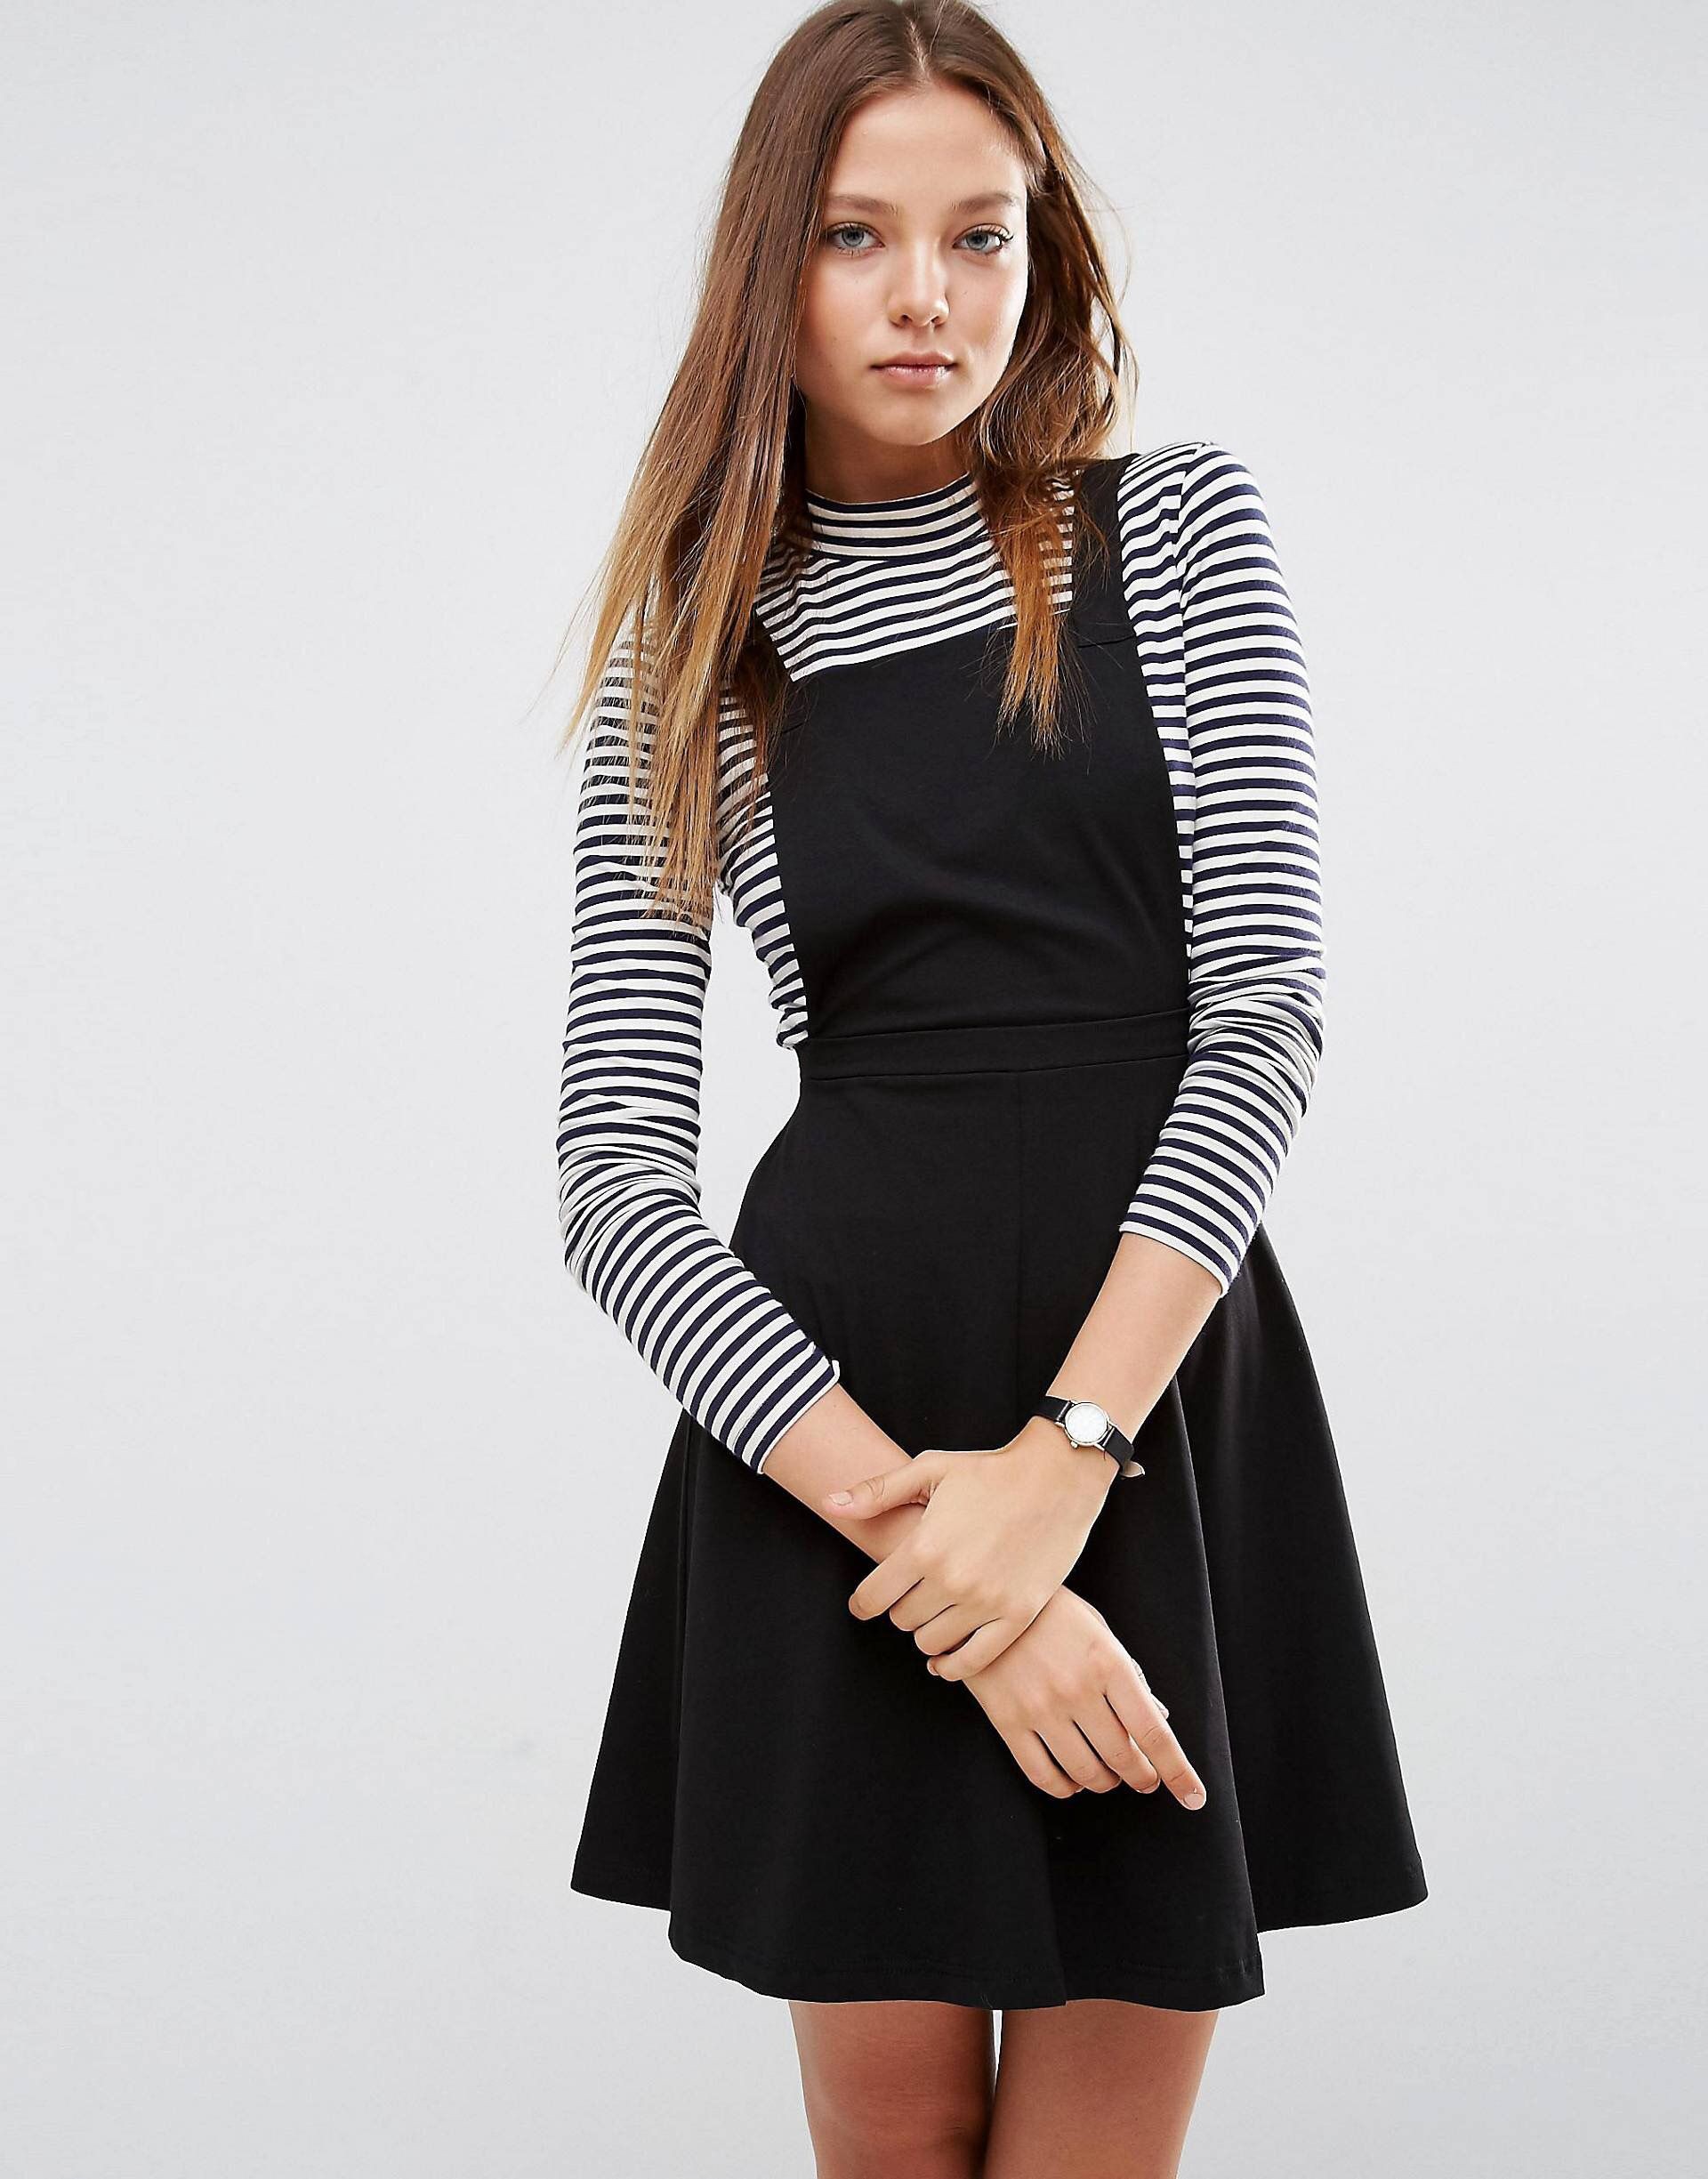 Dress with striped shirt underneath ...